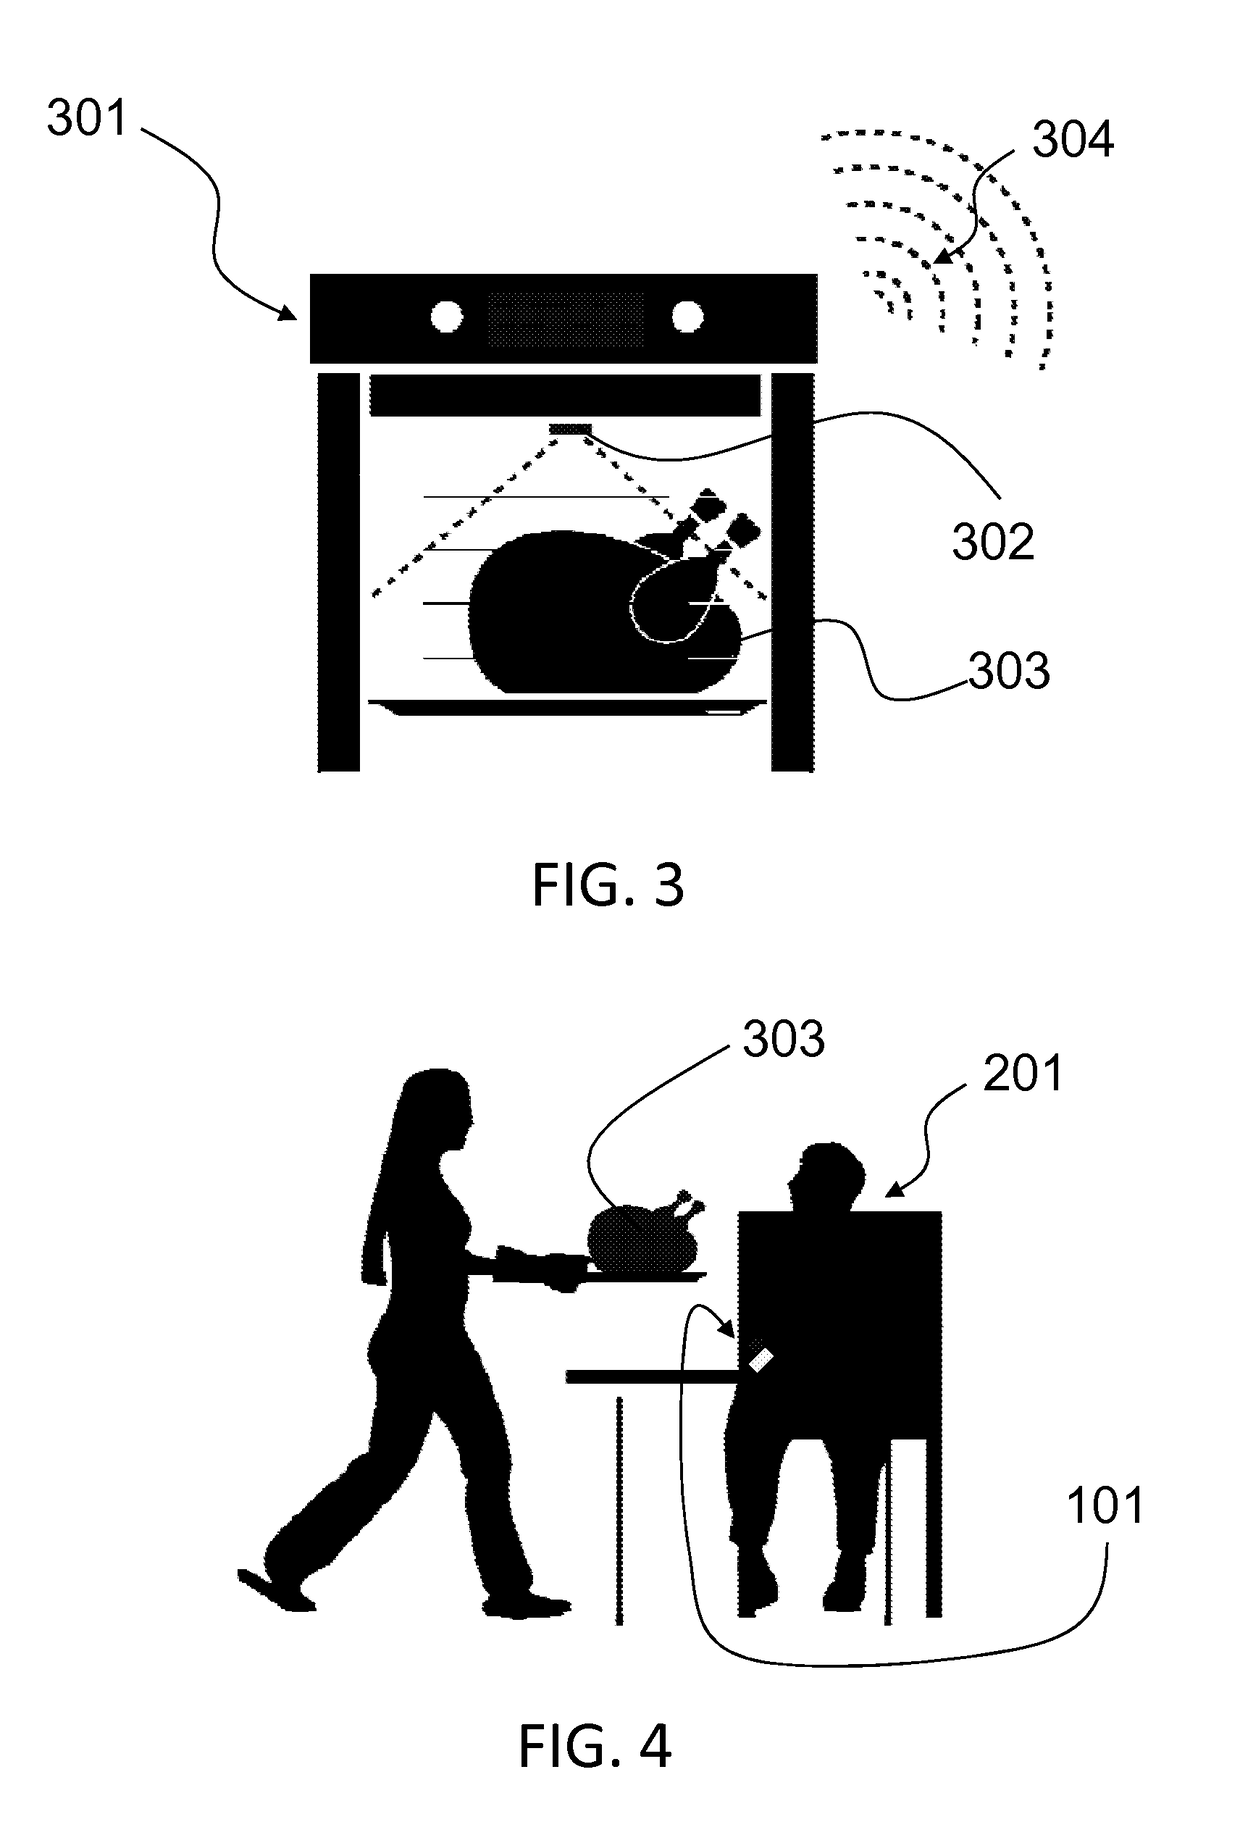 Household appliance interfaceable with a biometric monitoring system